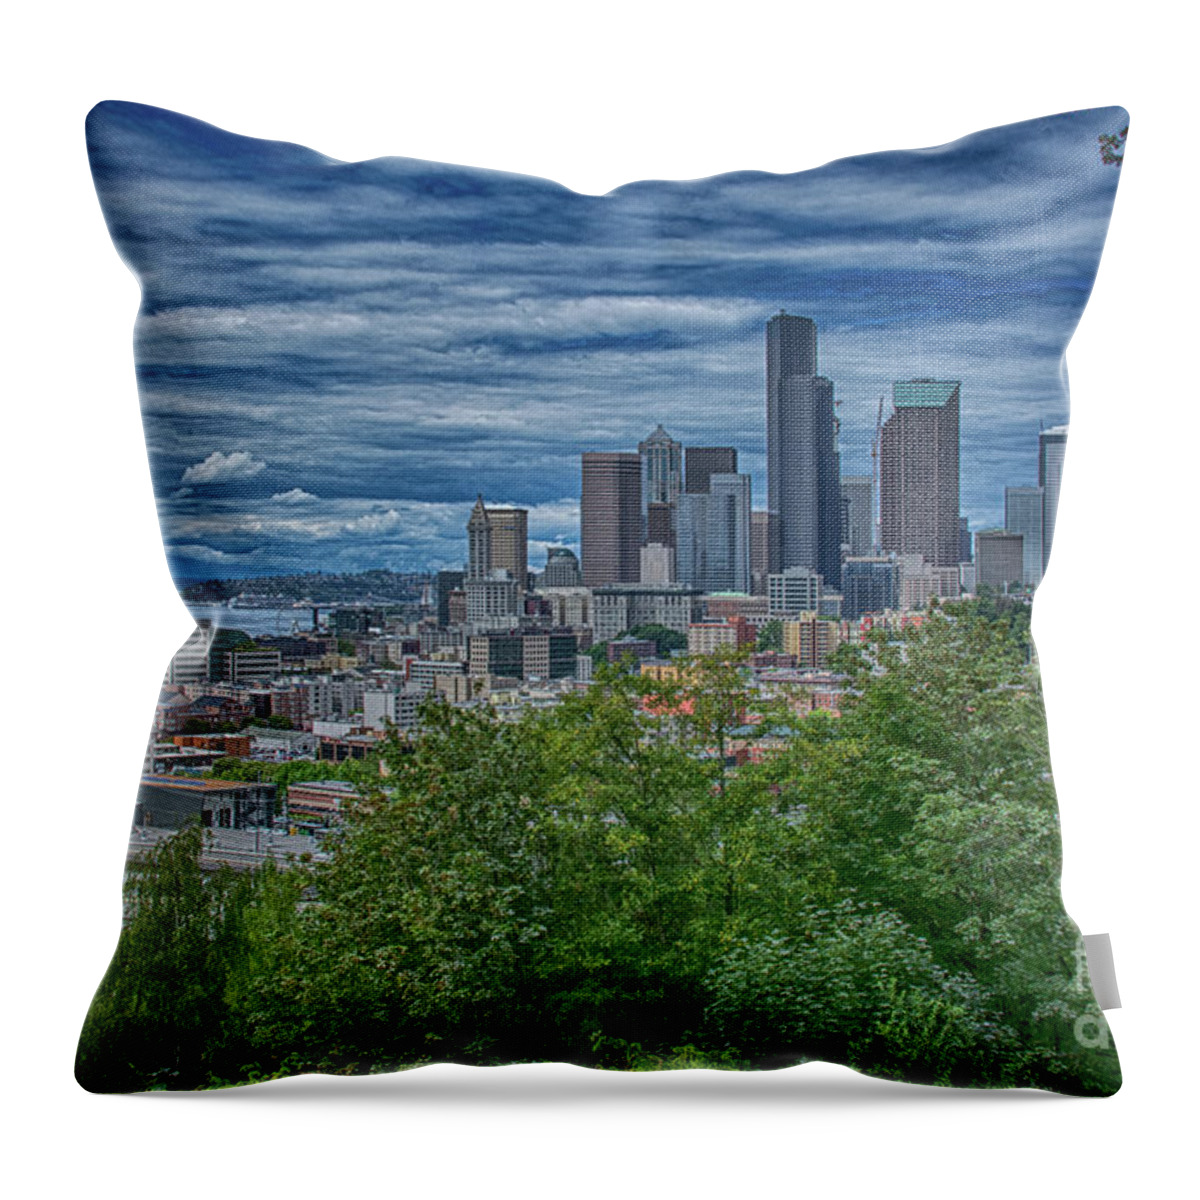 Seattle Throw Pillow featuring the photograph Seattle by John Greco